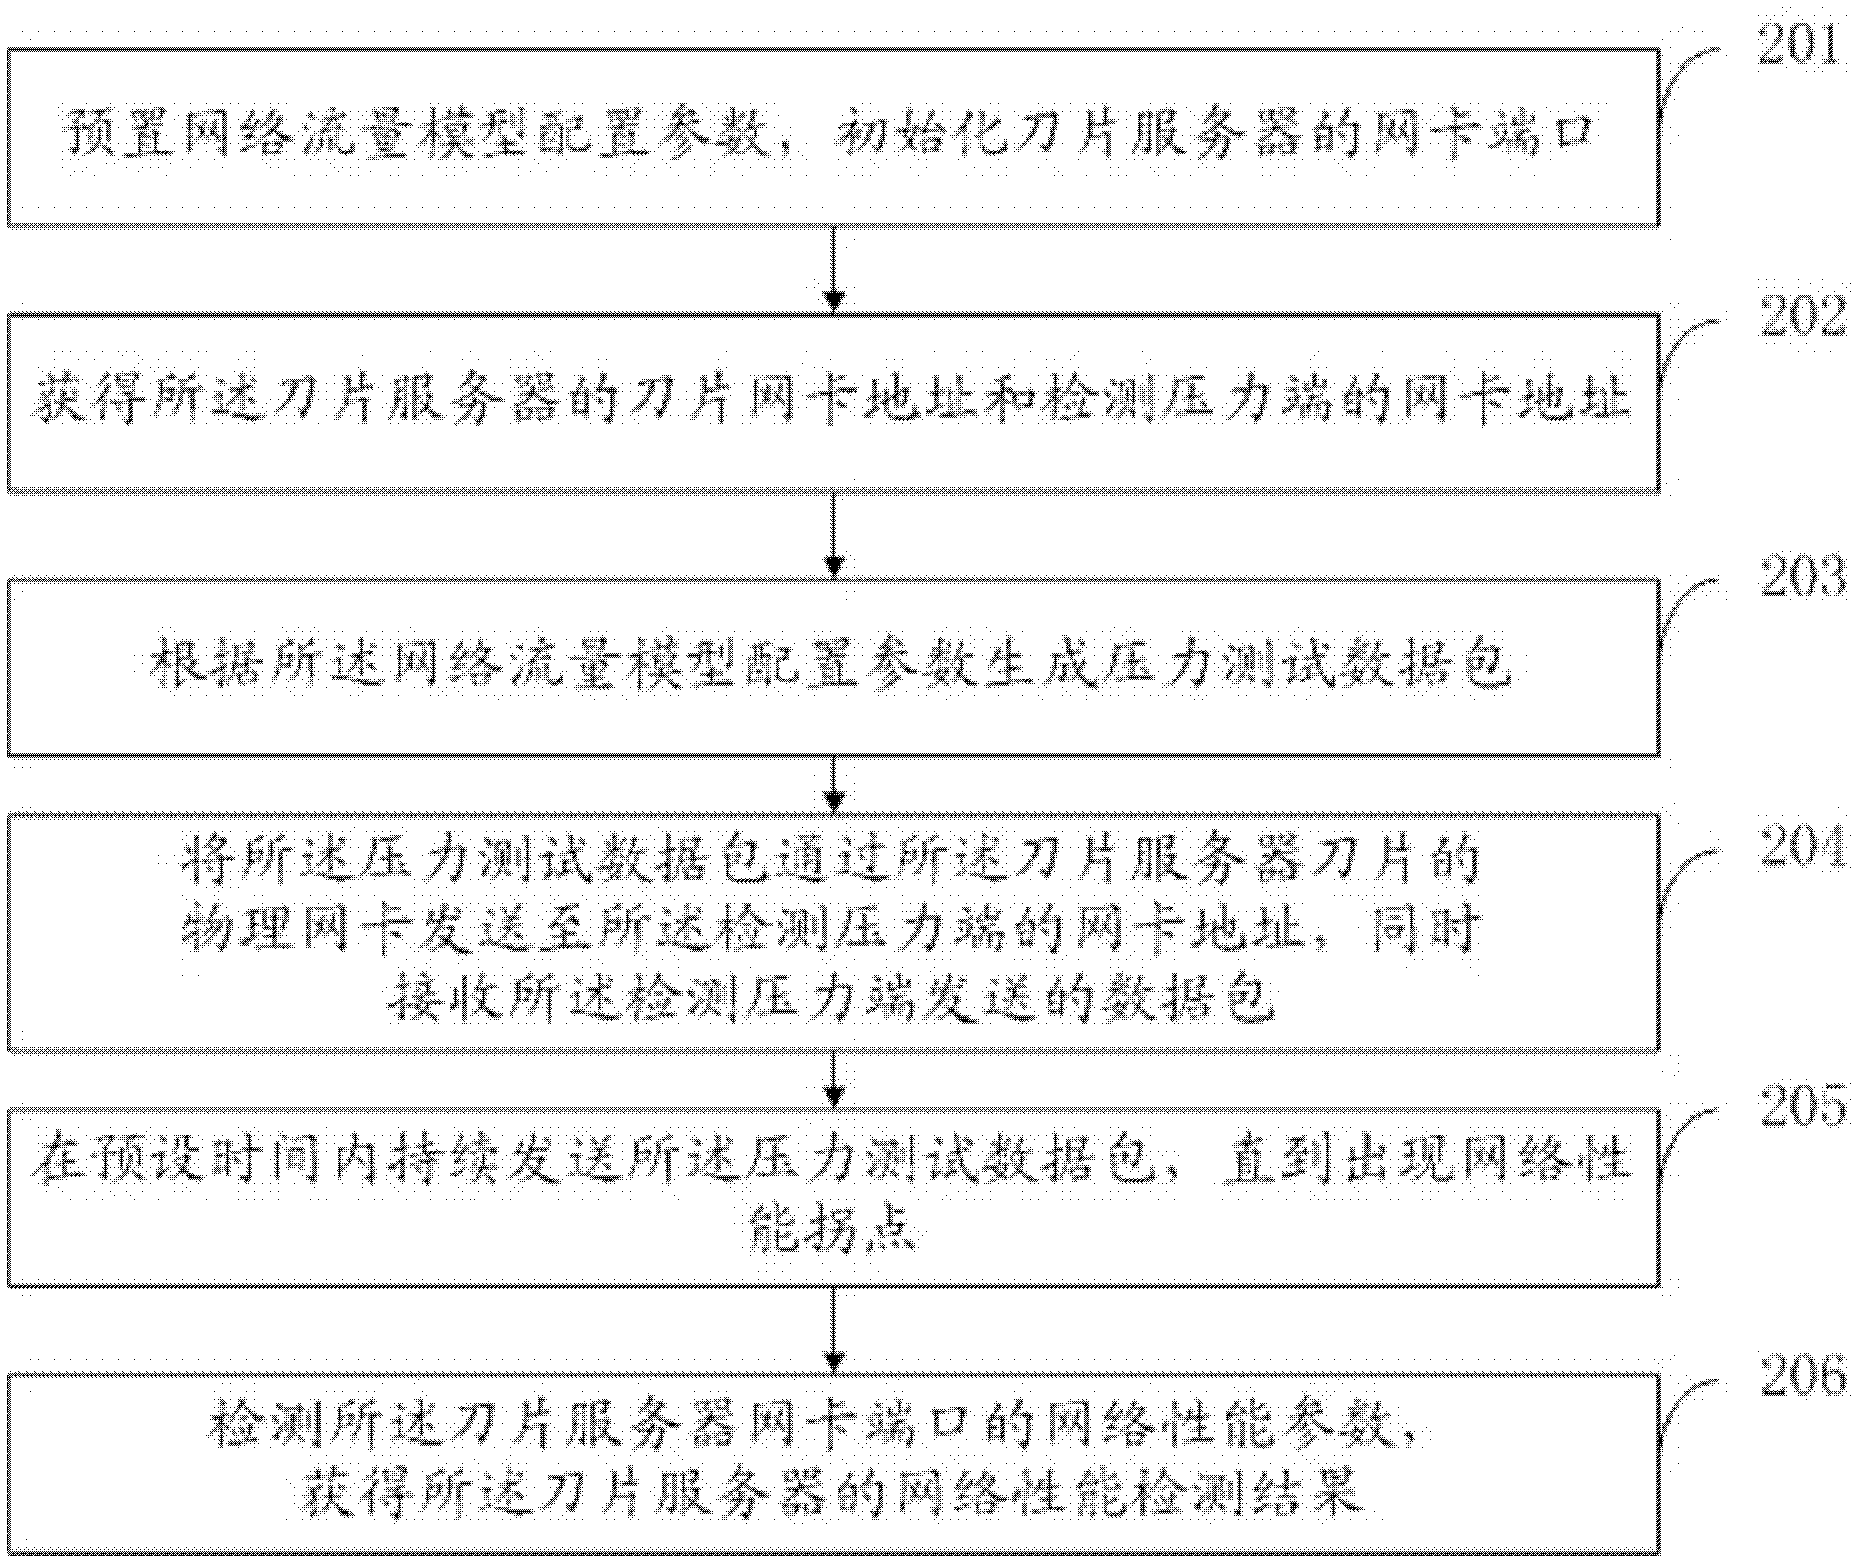 Network performance detection method and system of blade server